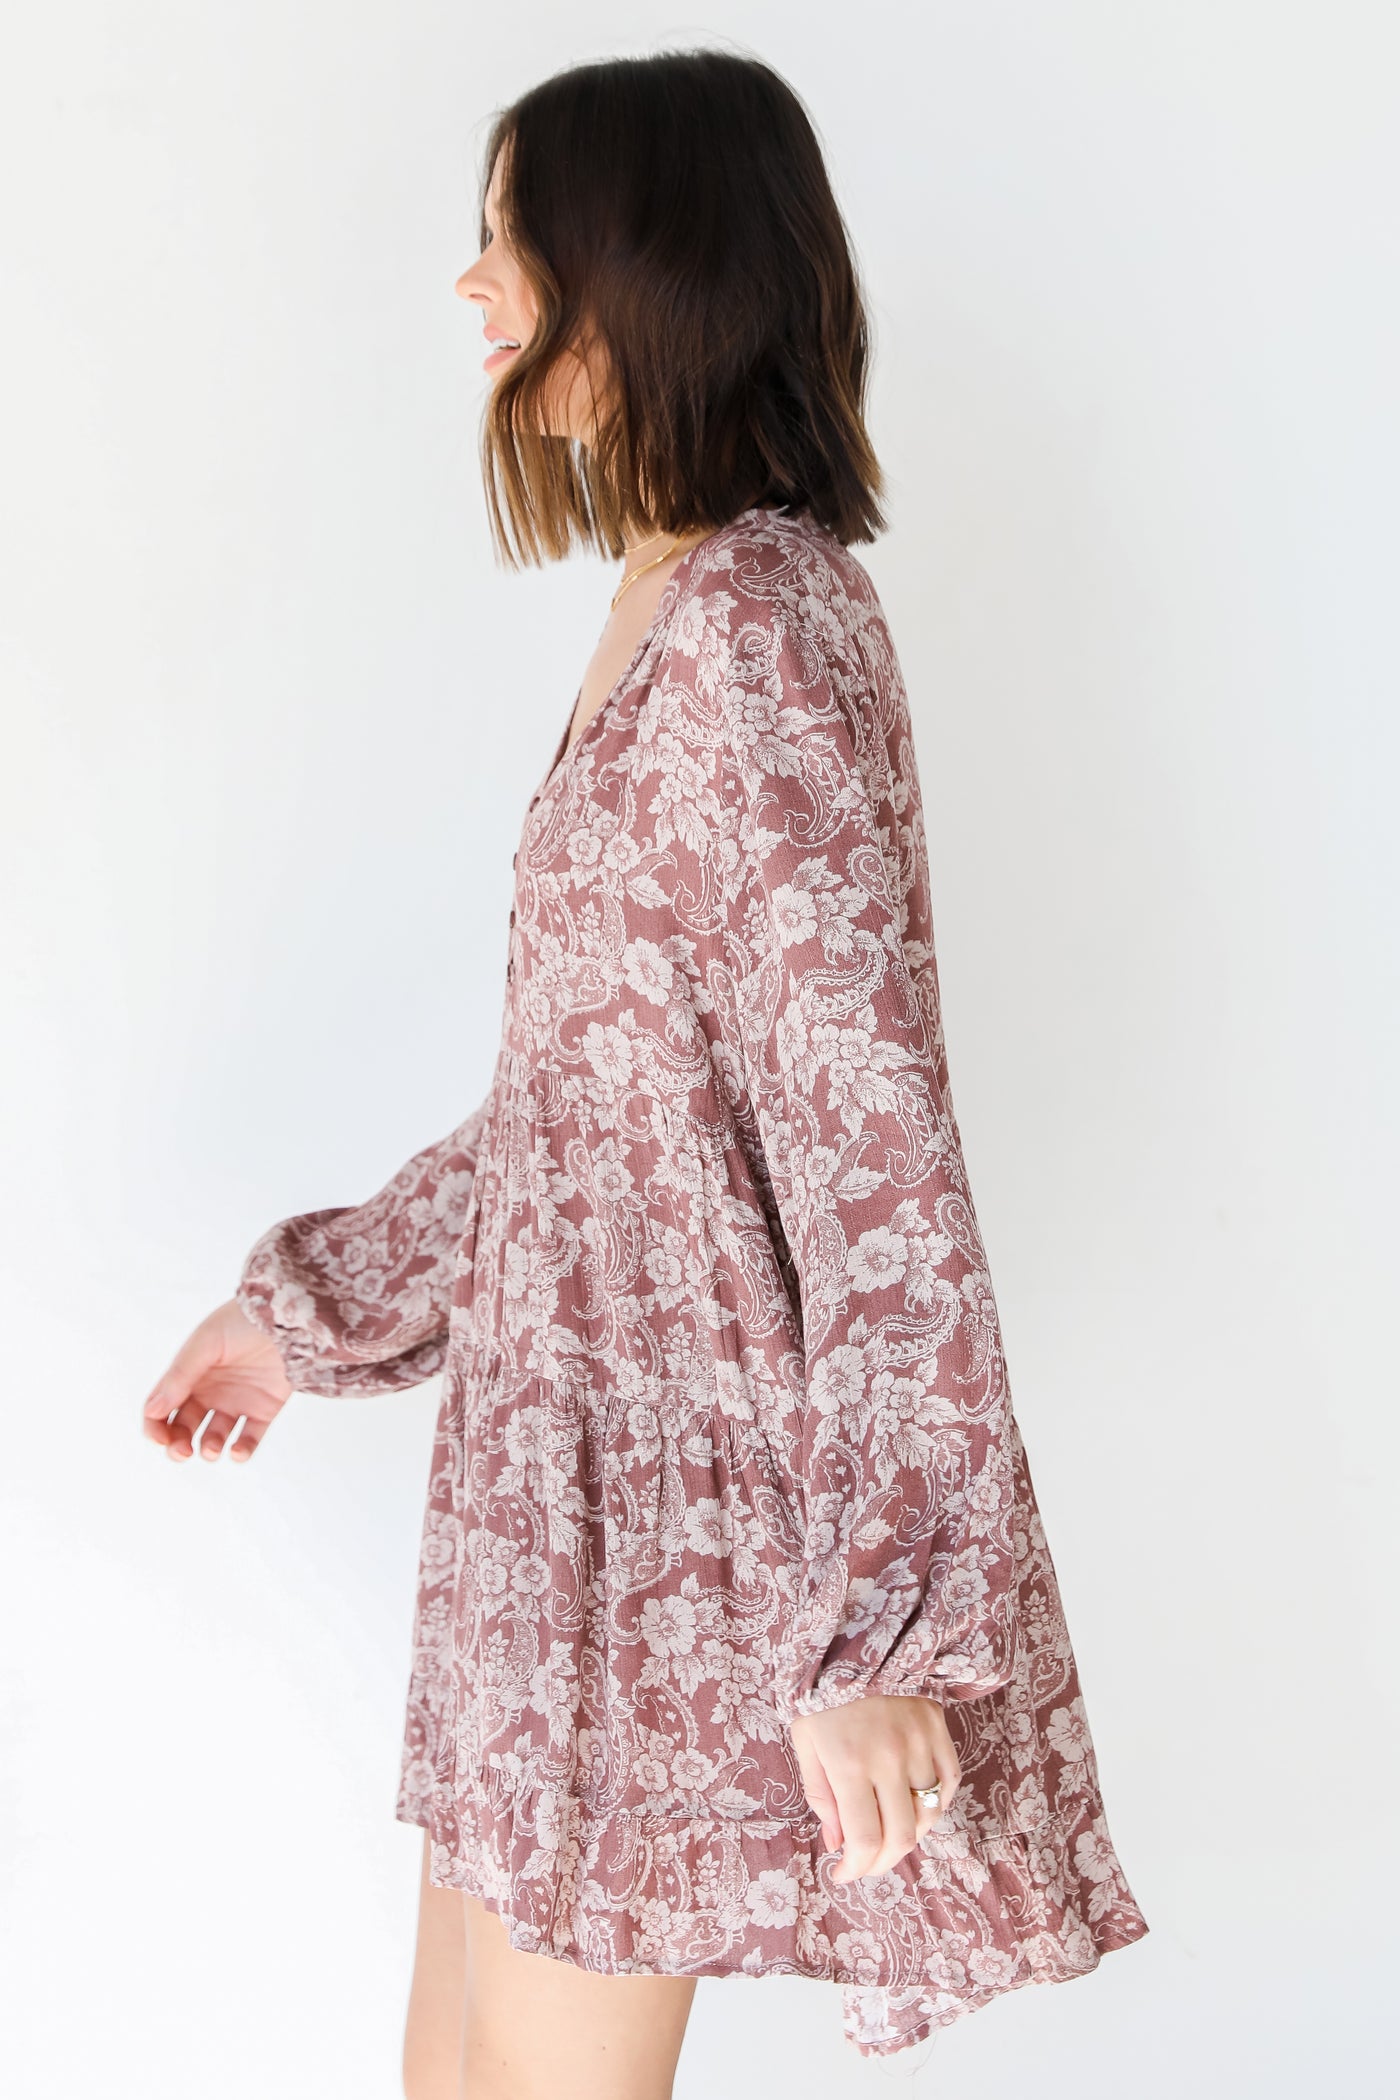 Tiered Floral Dress side view